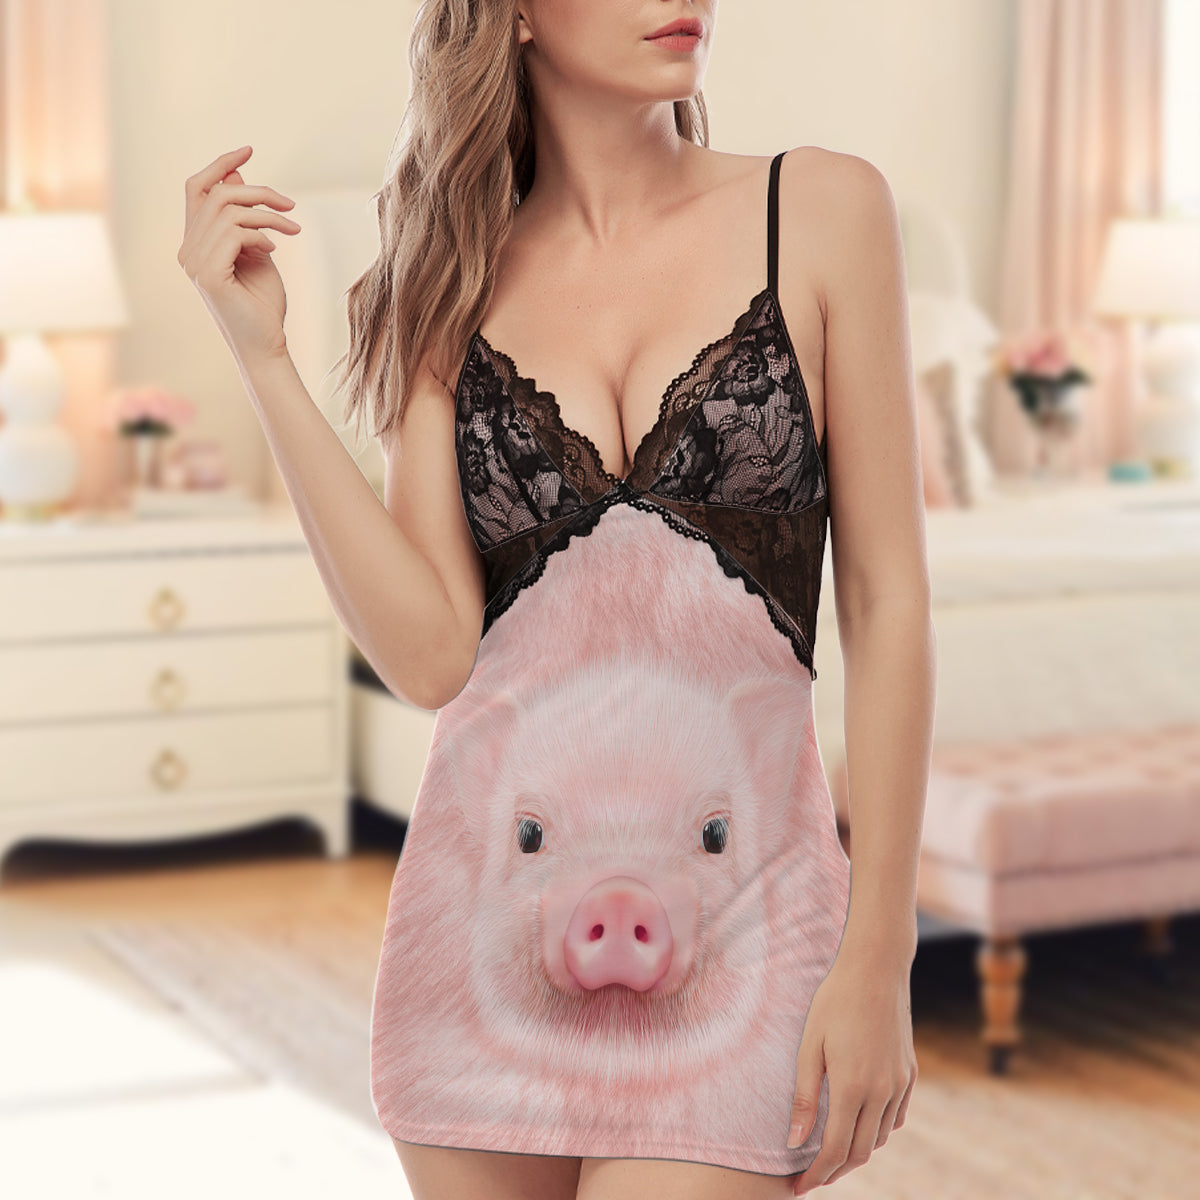 Stop Looking At My Butt Cami Dress